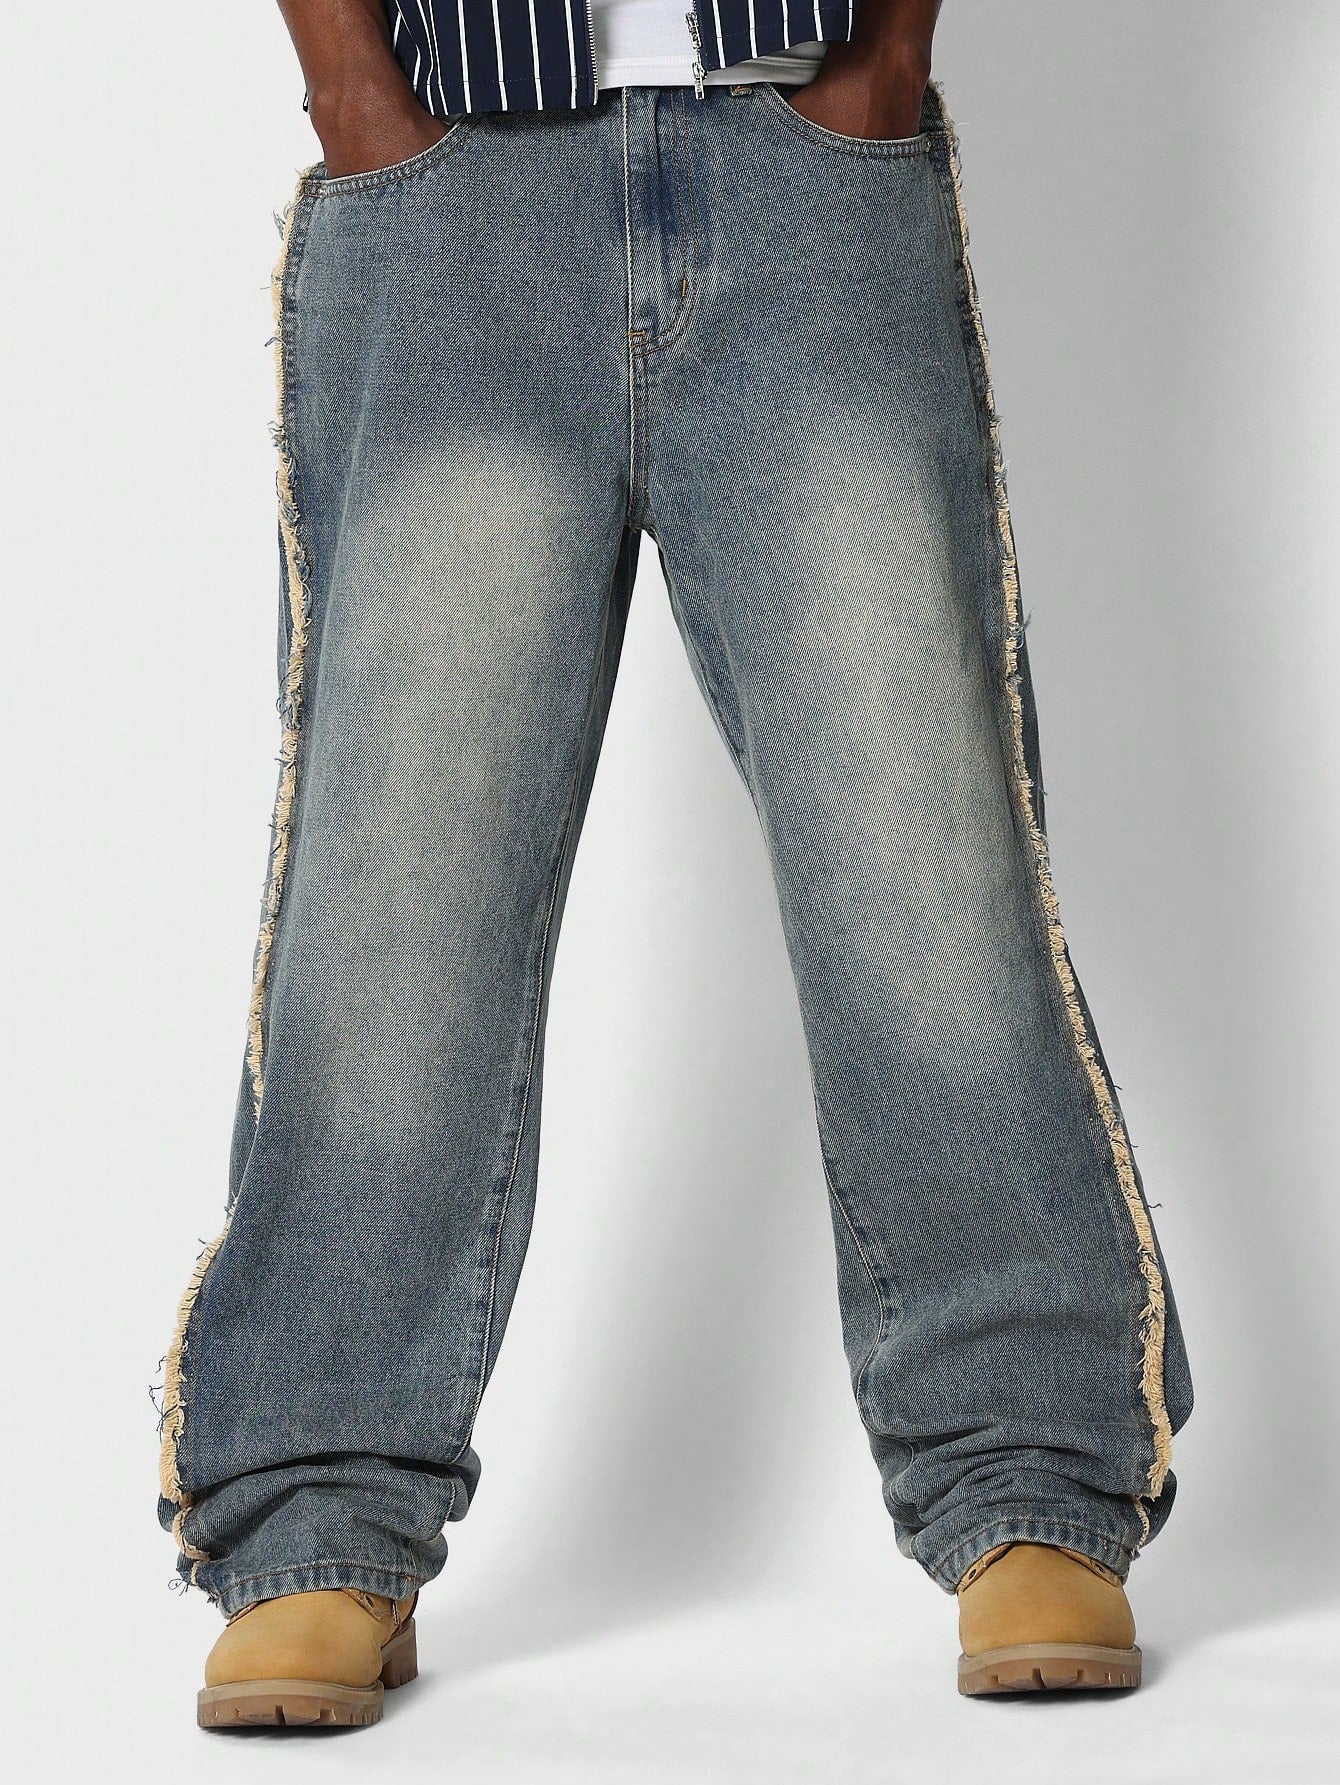 Super Oversized Fit Jean With Side Raw Edge Panel Detail